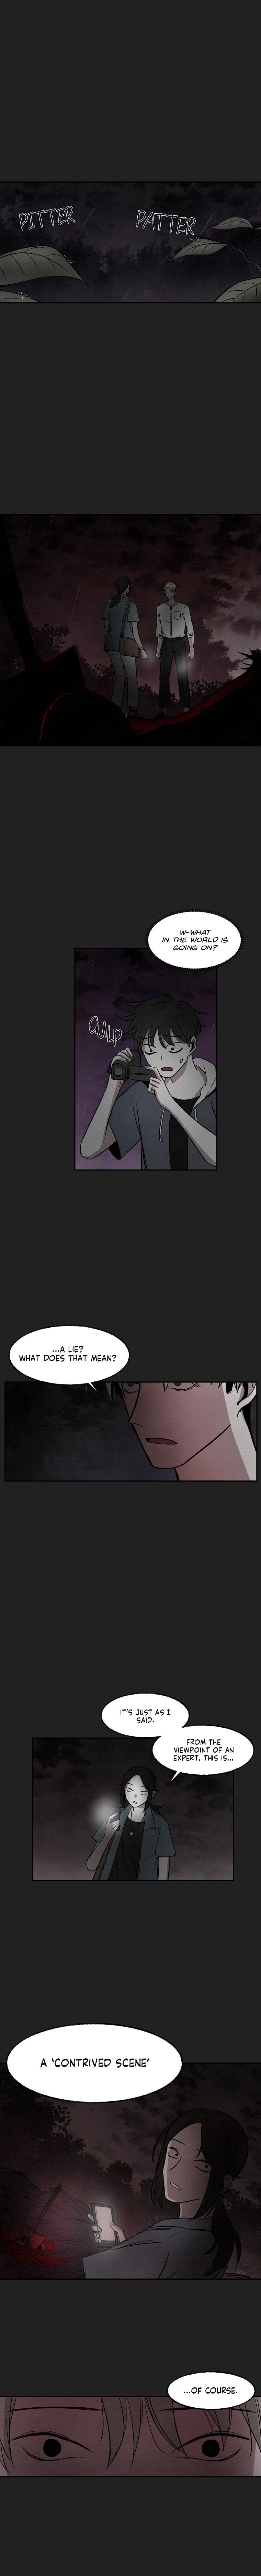 Devil’s Editing Chapter 7 - Page 1